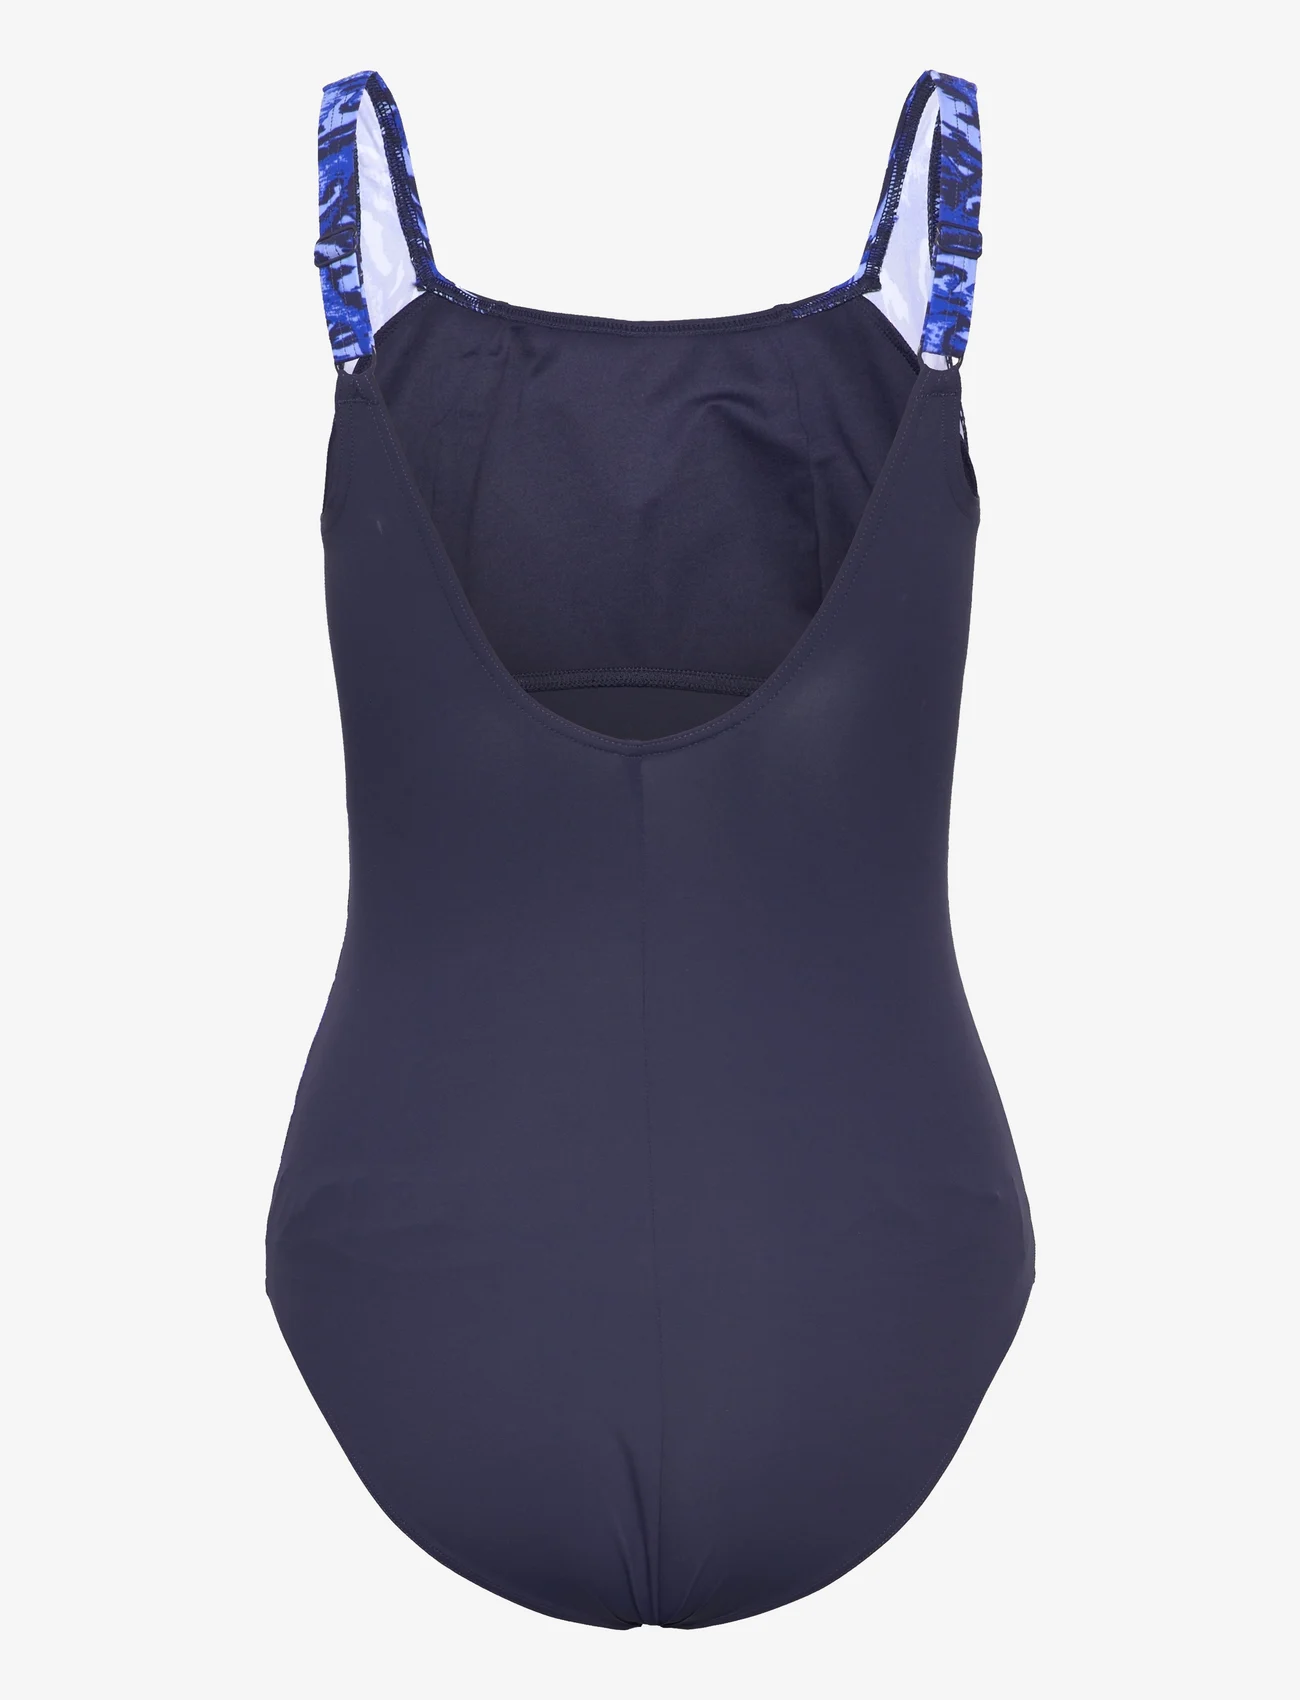 Speedo - Womens Shaping LunaLustre Printed 1 Piece - swimsuits - navy/blue - 1